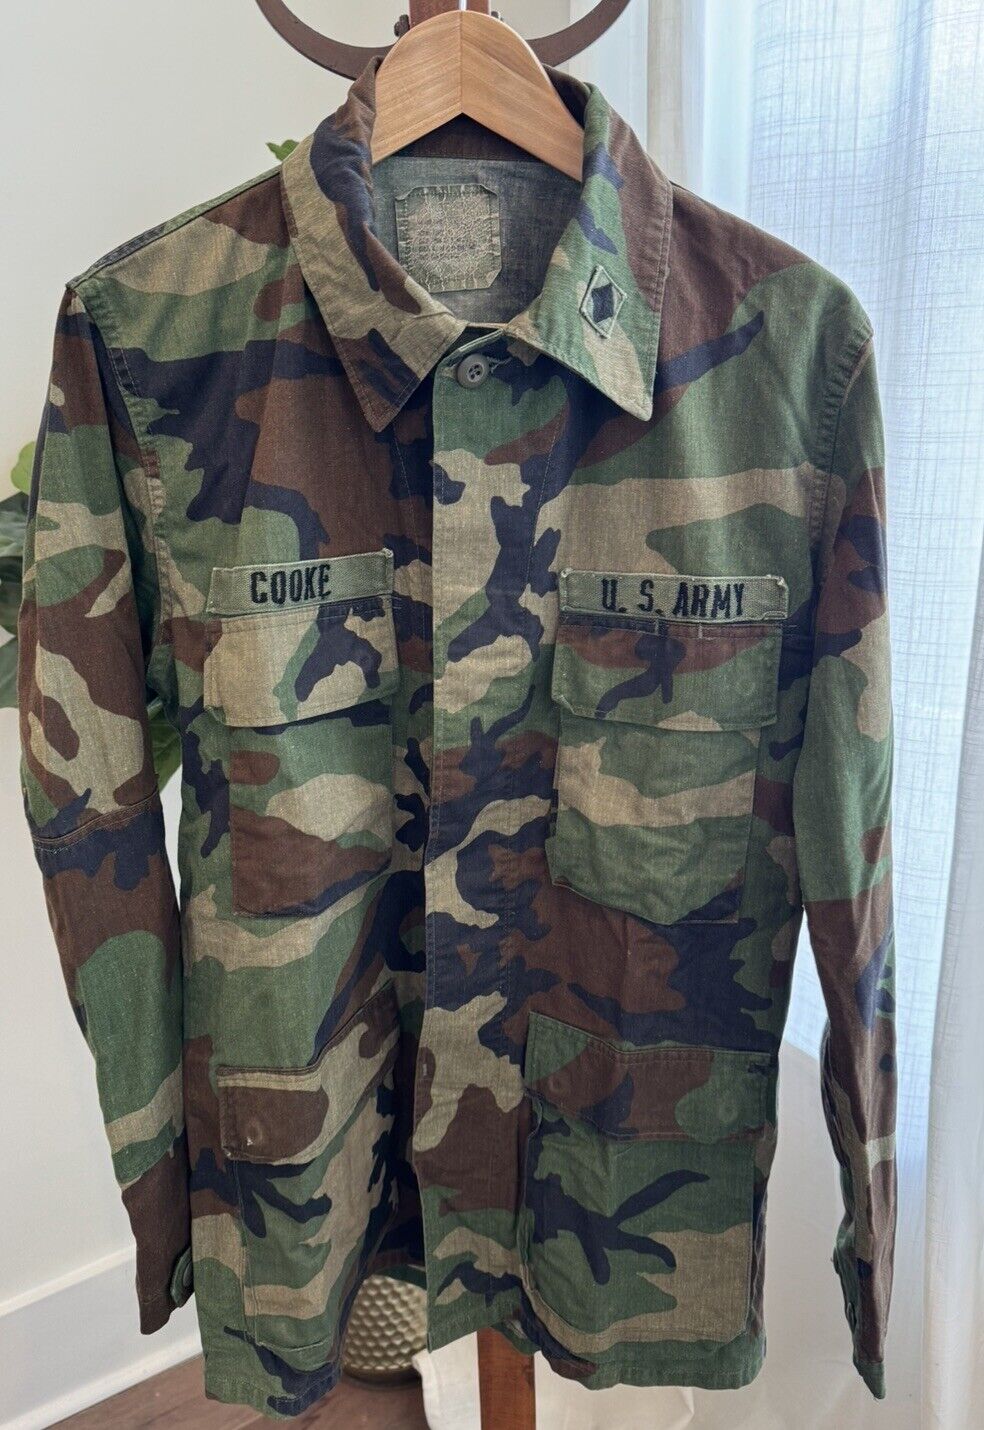 80’s U.S. Army Field Jacket Patched Camouflage Mens’sMed Tall, NC National Guard